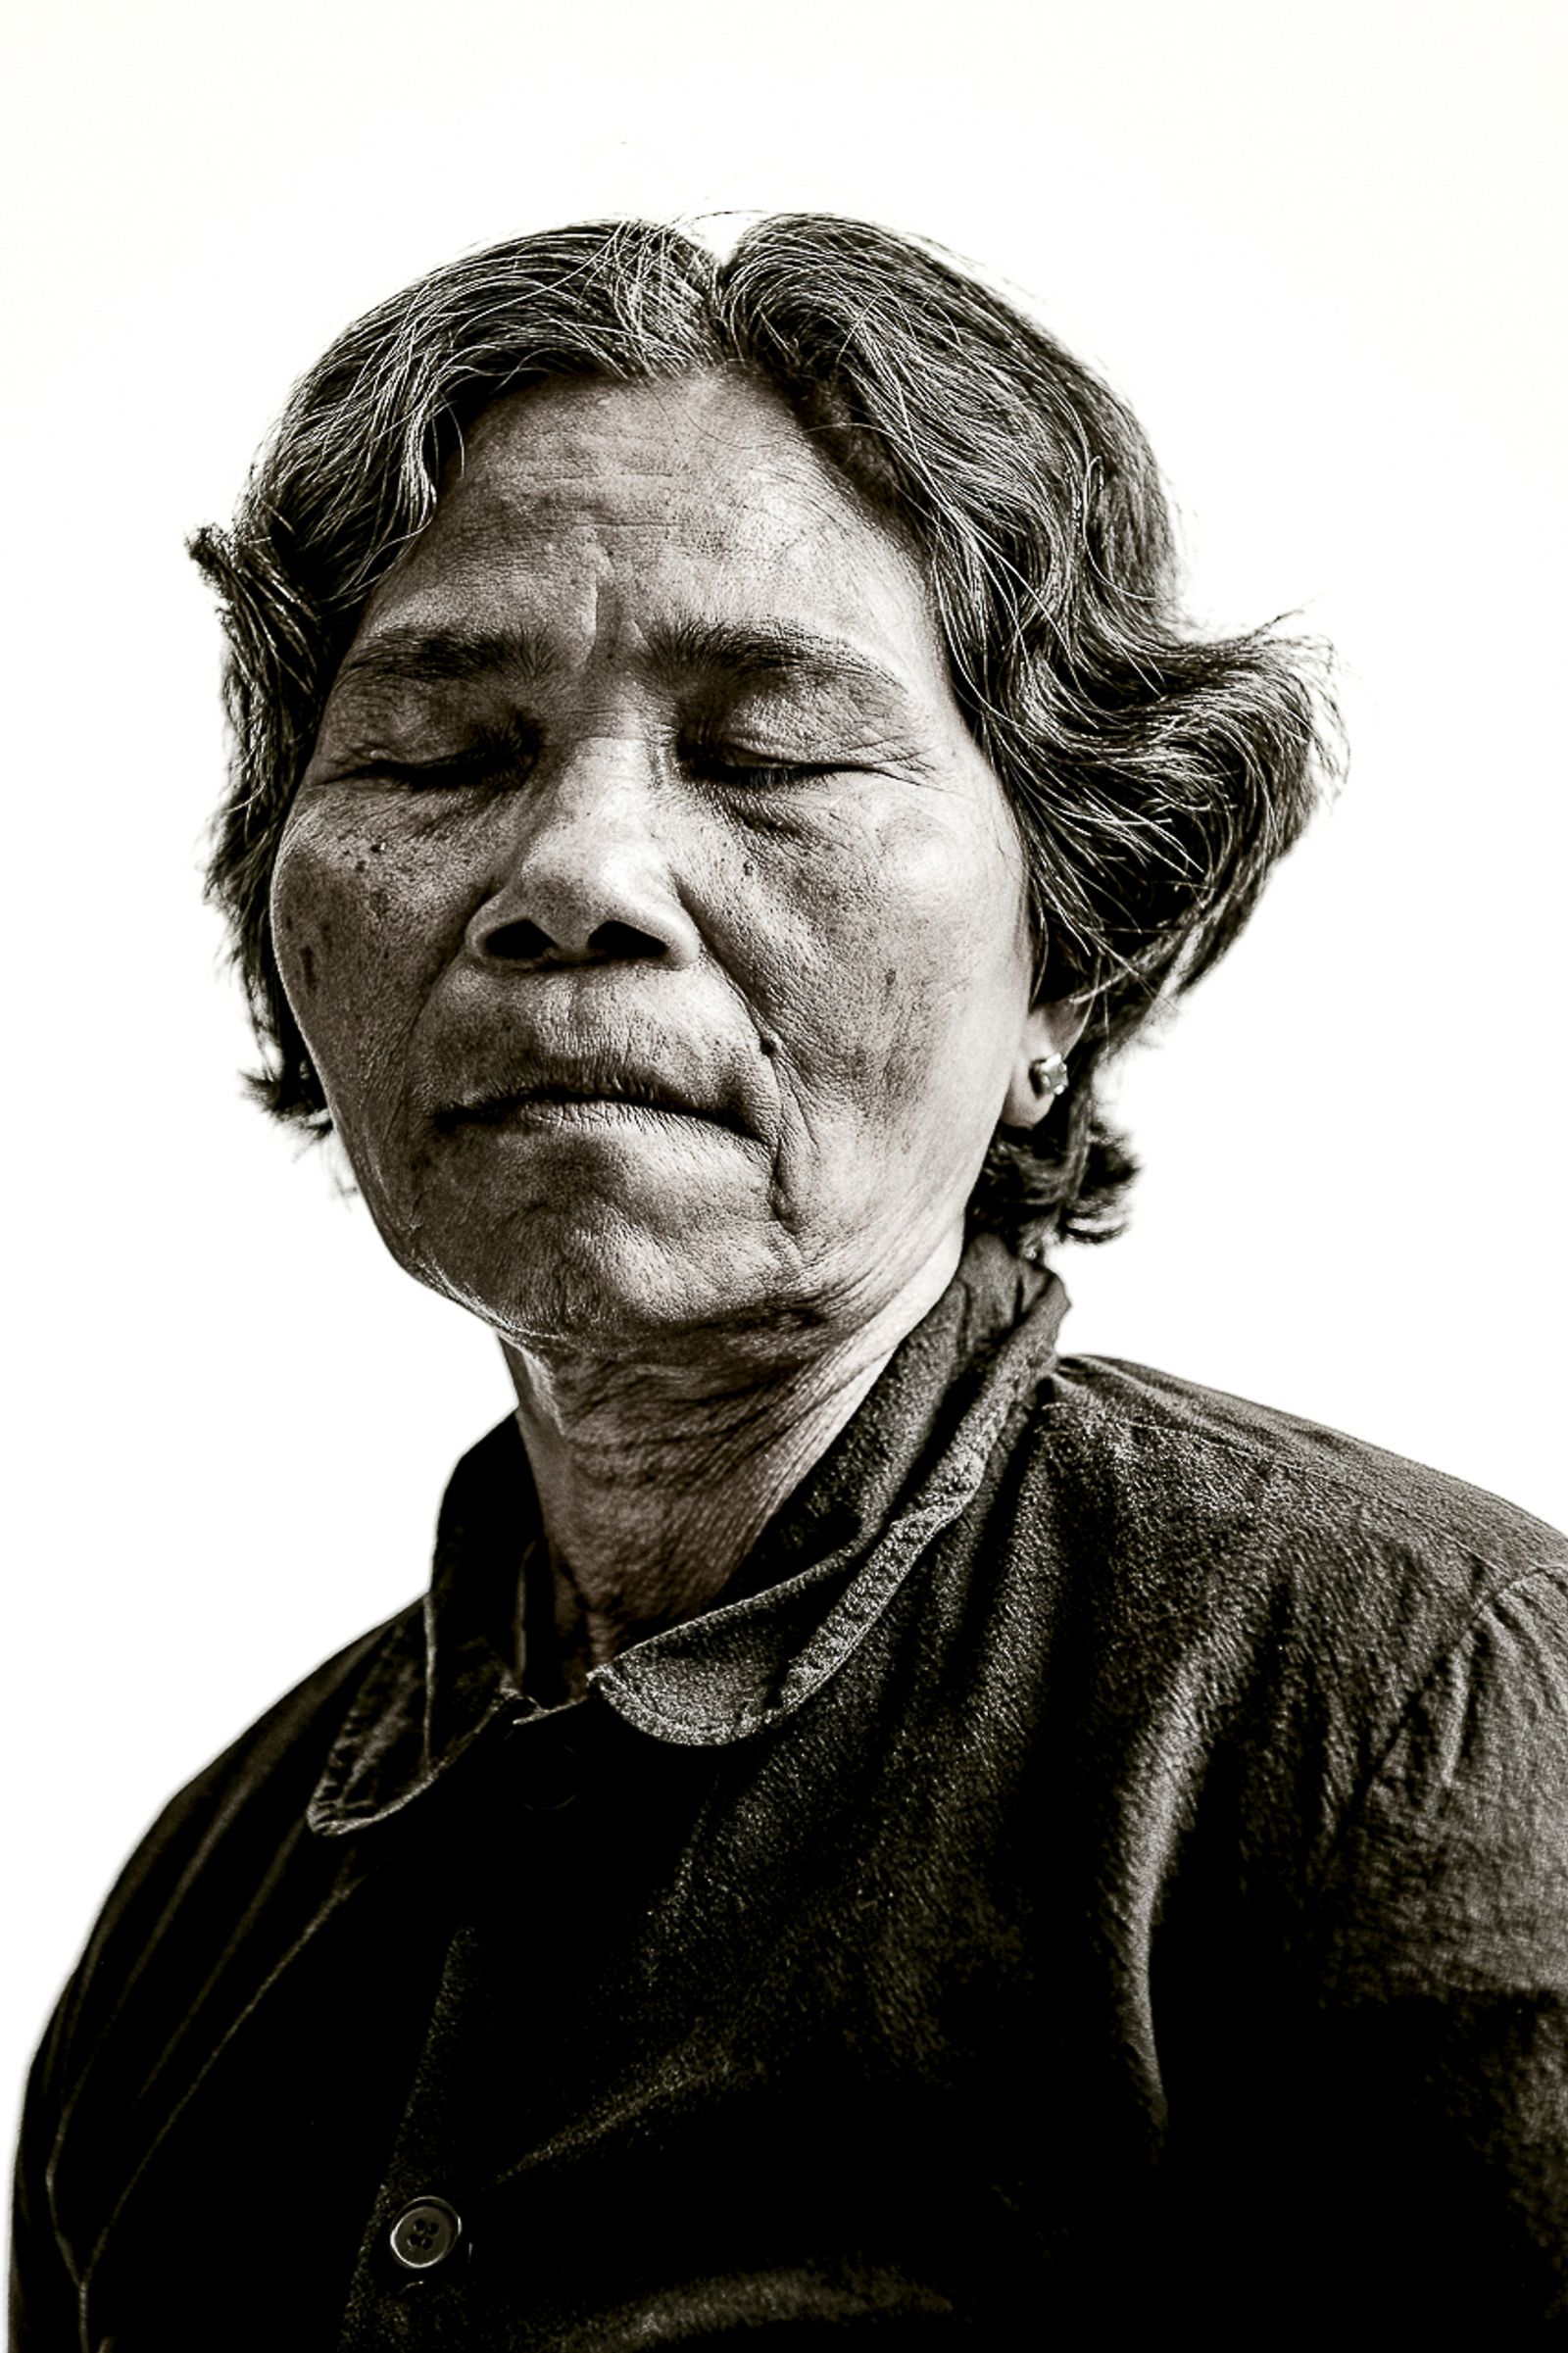 © ANDREA Garuti - Image from the REDUCED DICTATURE KHMER RED photography project